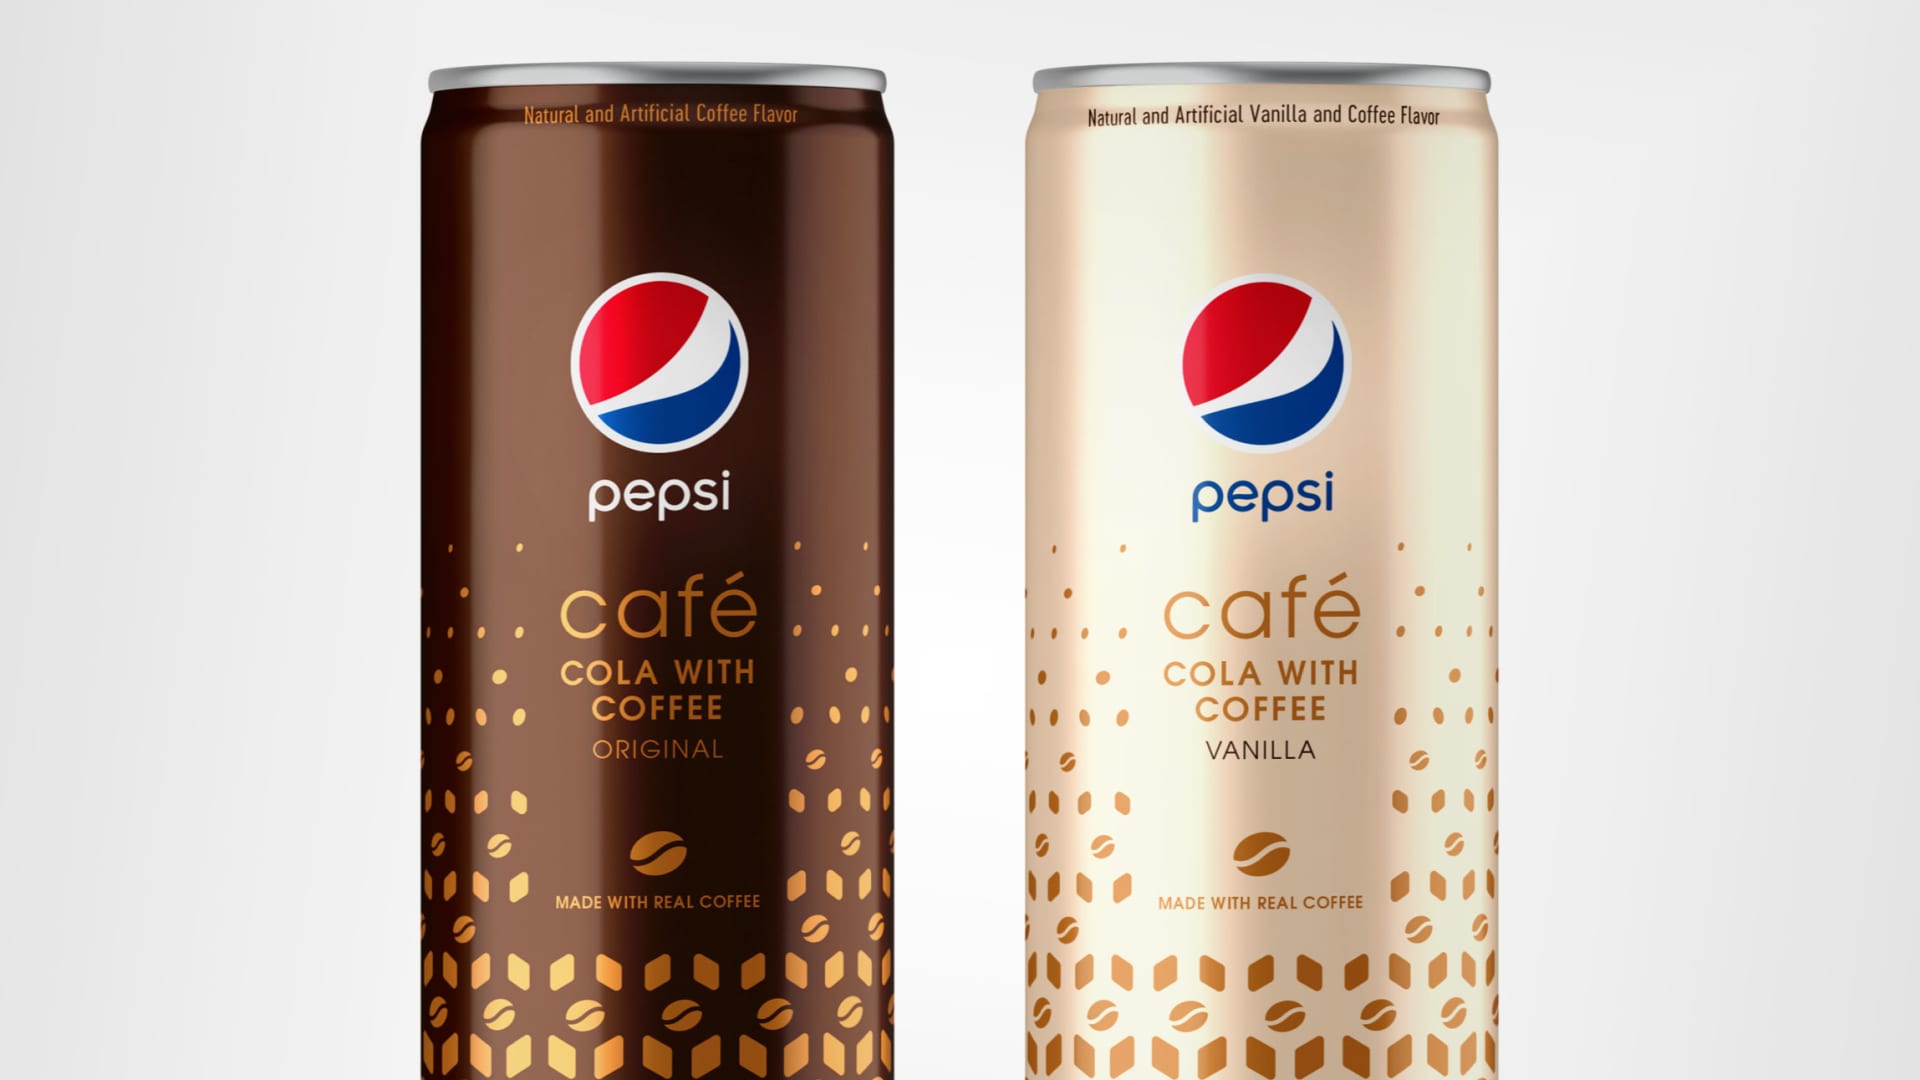 a Cafe, next Pepsi coffee-cola drink, debut to PepsiCo year